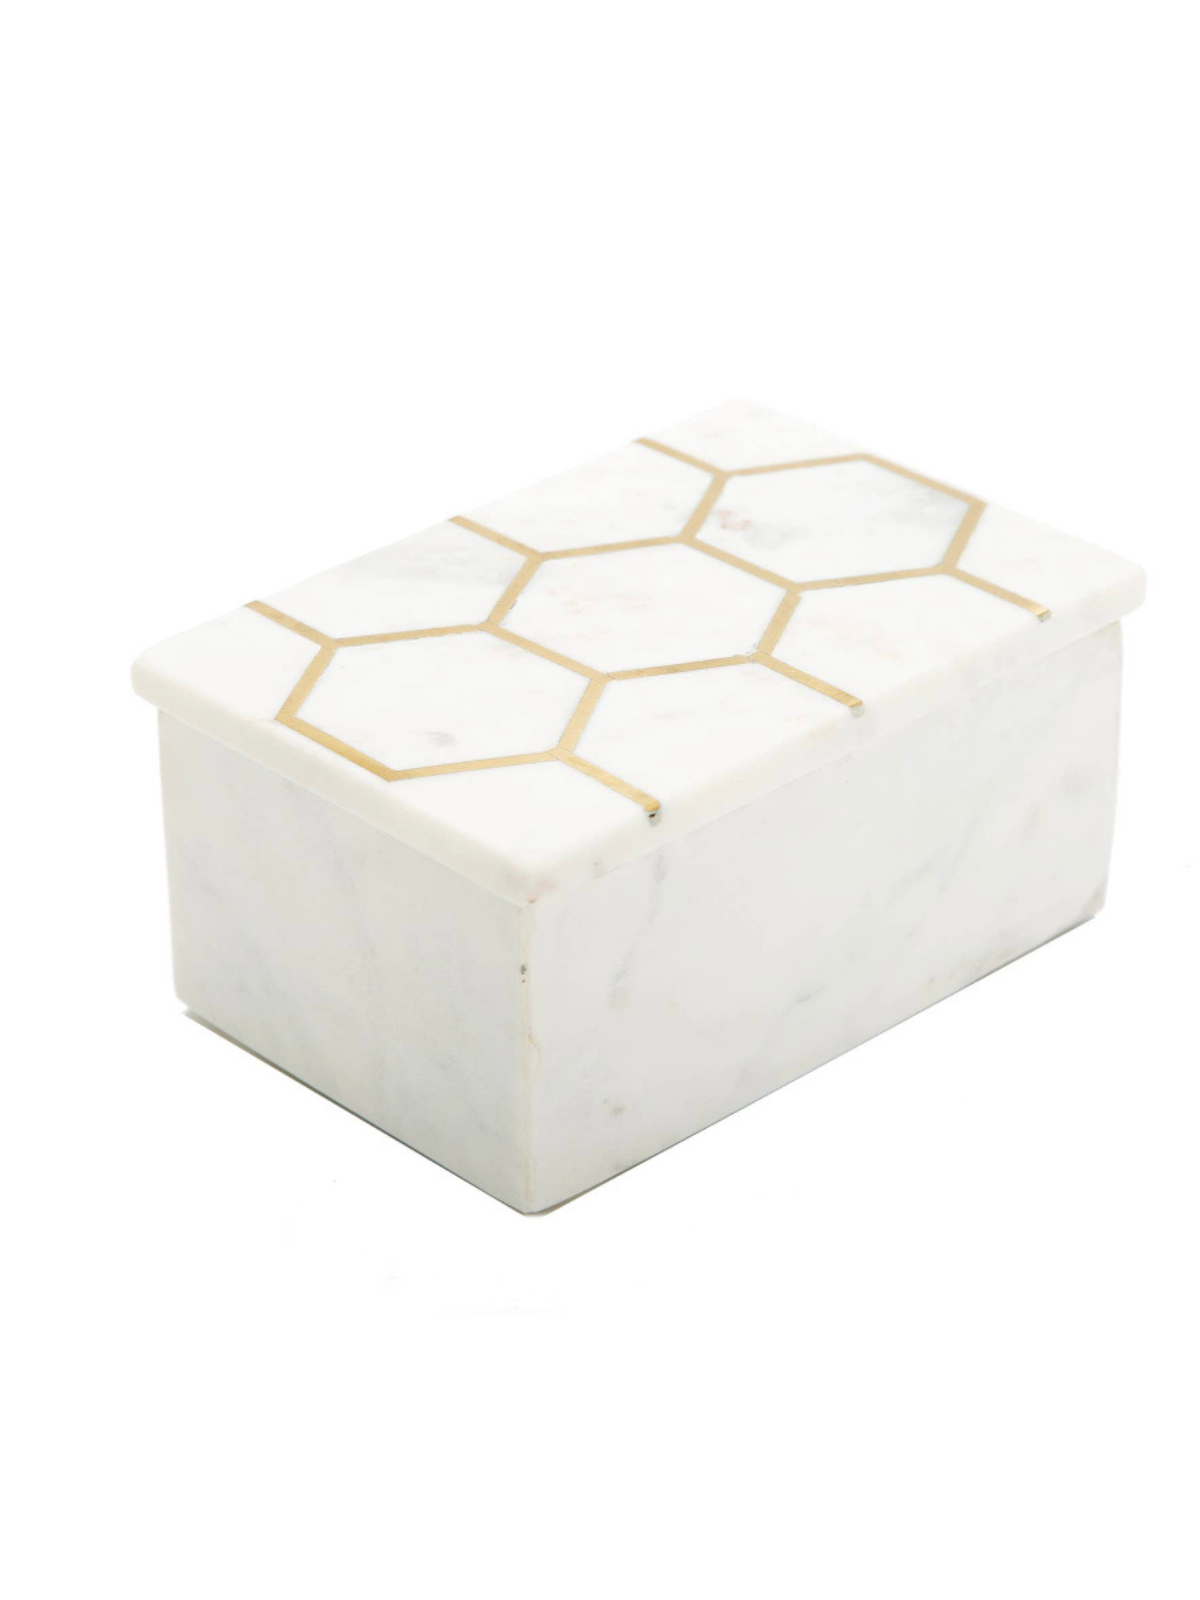 White Marble Decorative Box With Gold Hexagon Design On Cover Sold by KYA Home Decor.